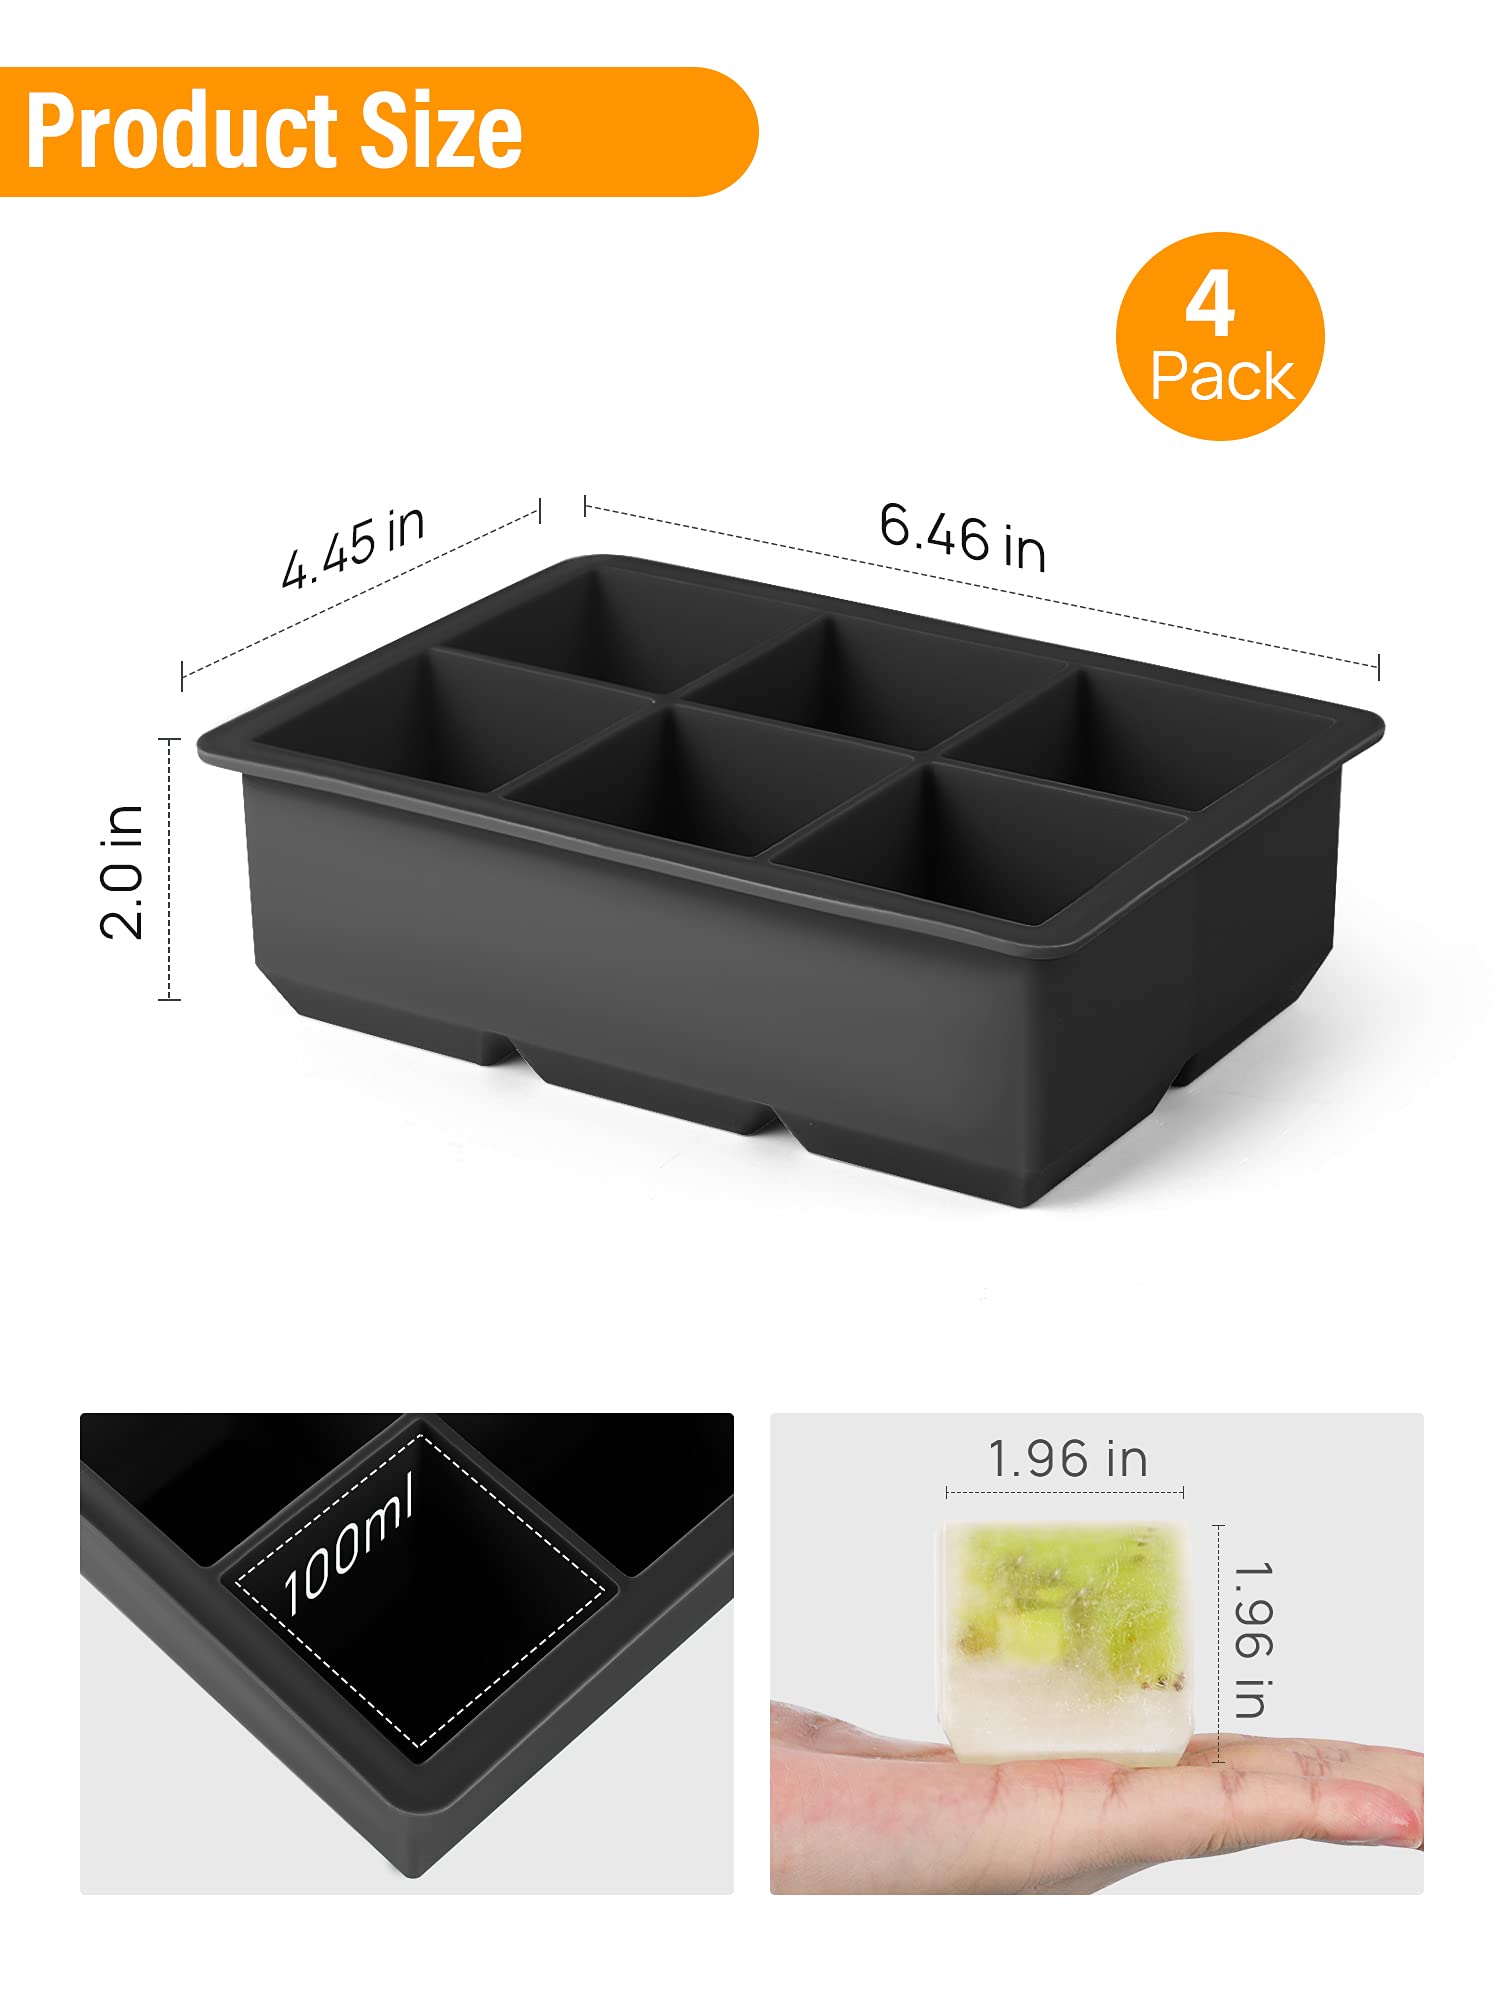 Kootek 4 Set Silicone Ice Cube Trays with Lids, BPA Free Large Square Molds - Easy Release Reusable Tray Flexible Mold for Chilling Whiskey Wine Cocktail Beverages Juice